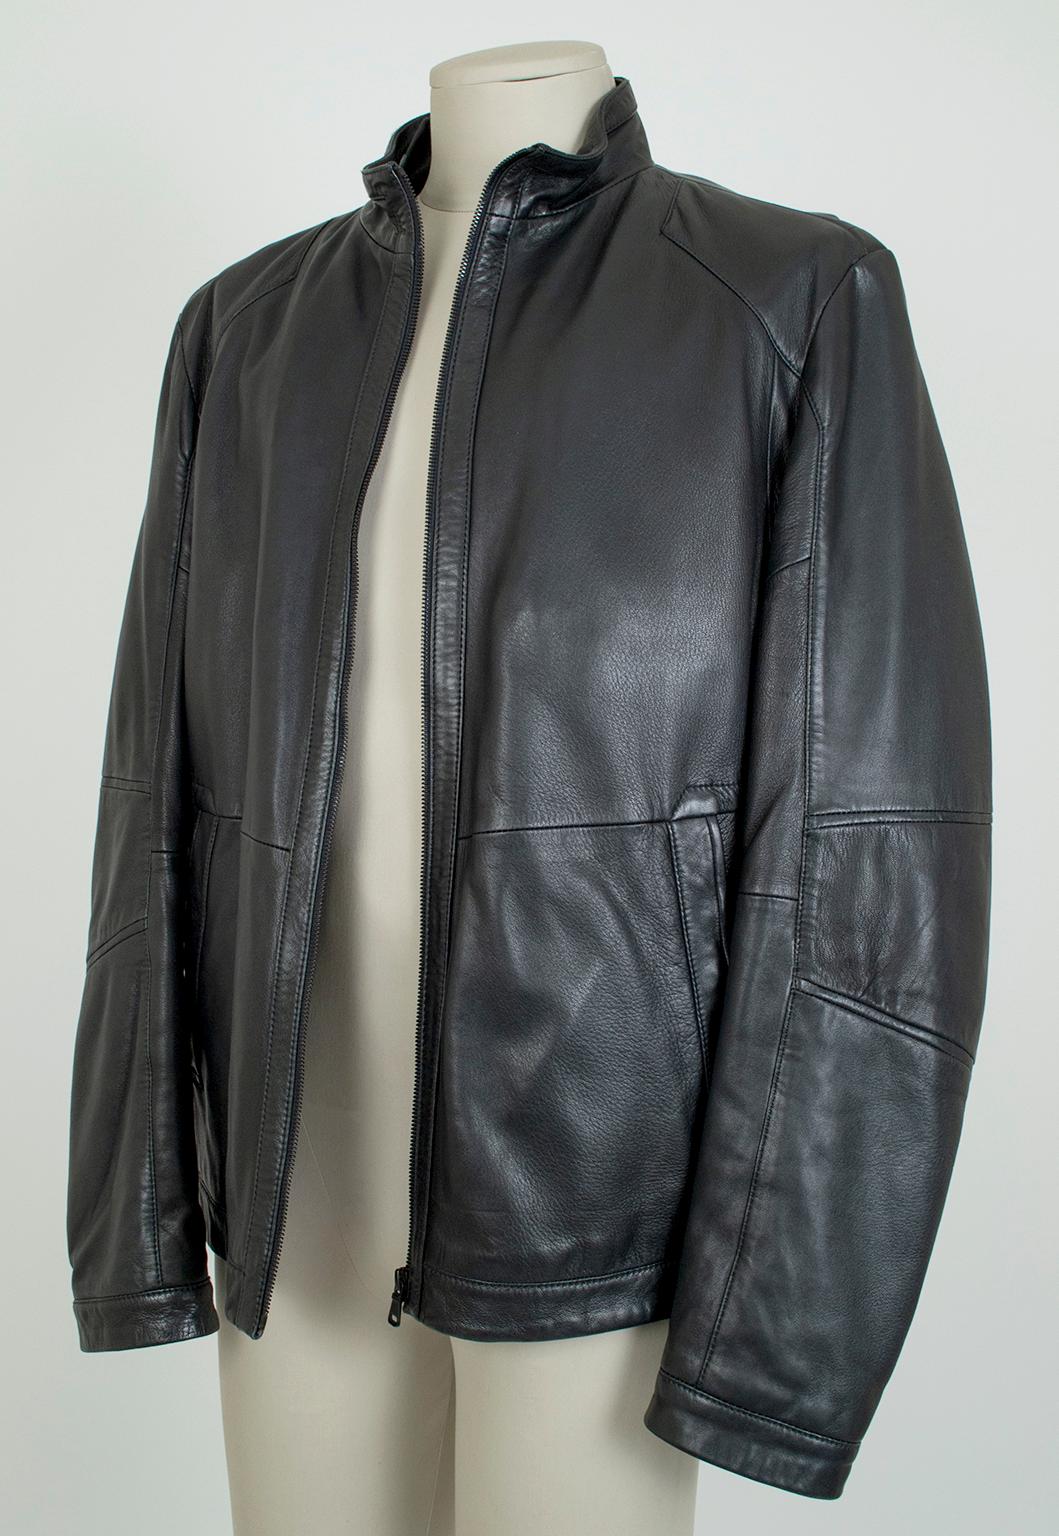 A jacket that can seamlessly transition from jeans and sneakers to vicuna trousers and Testoni shoes, the leather moto is a timeless wardrobe workhorse. With its horizontal elbow seams, stand collar and reinforced shoulders and gussets, this one